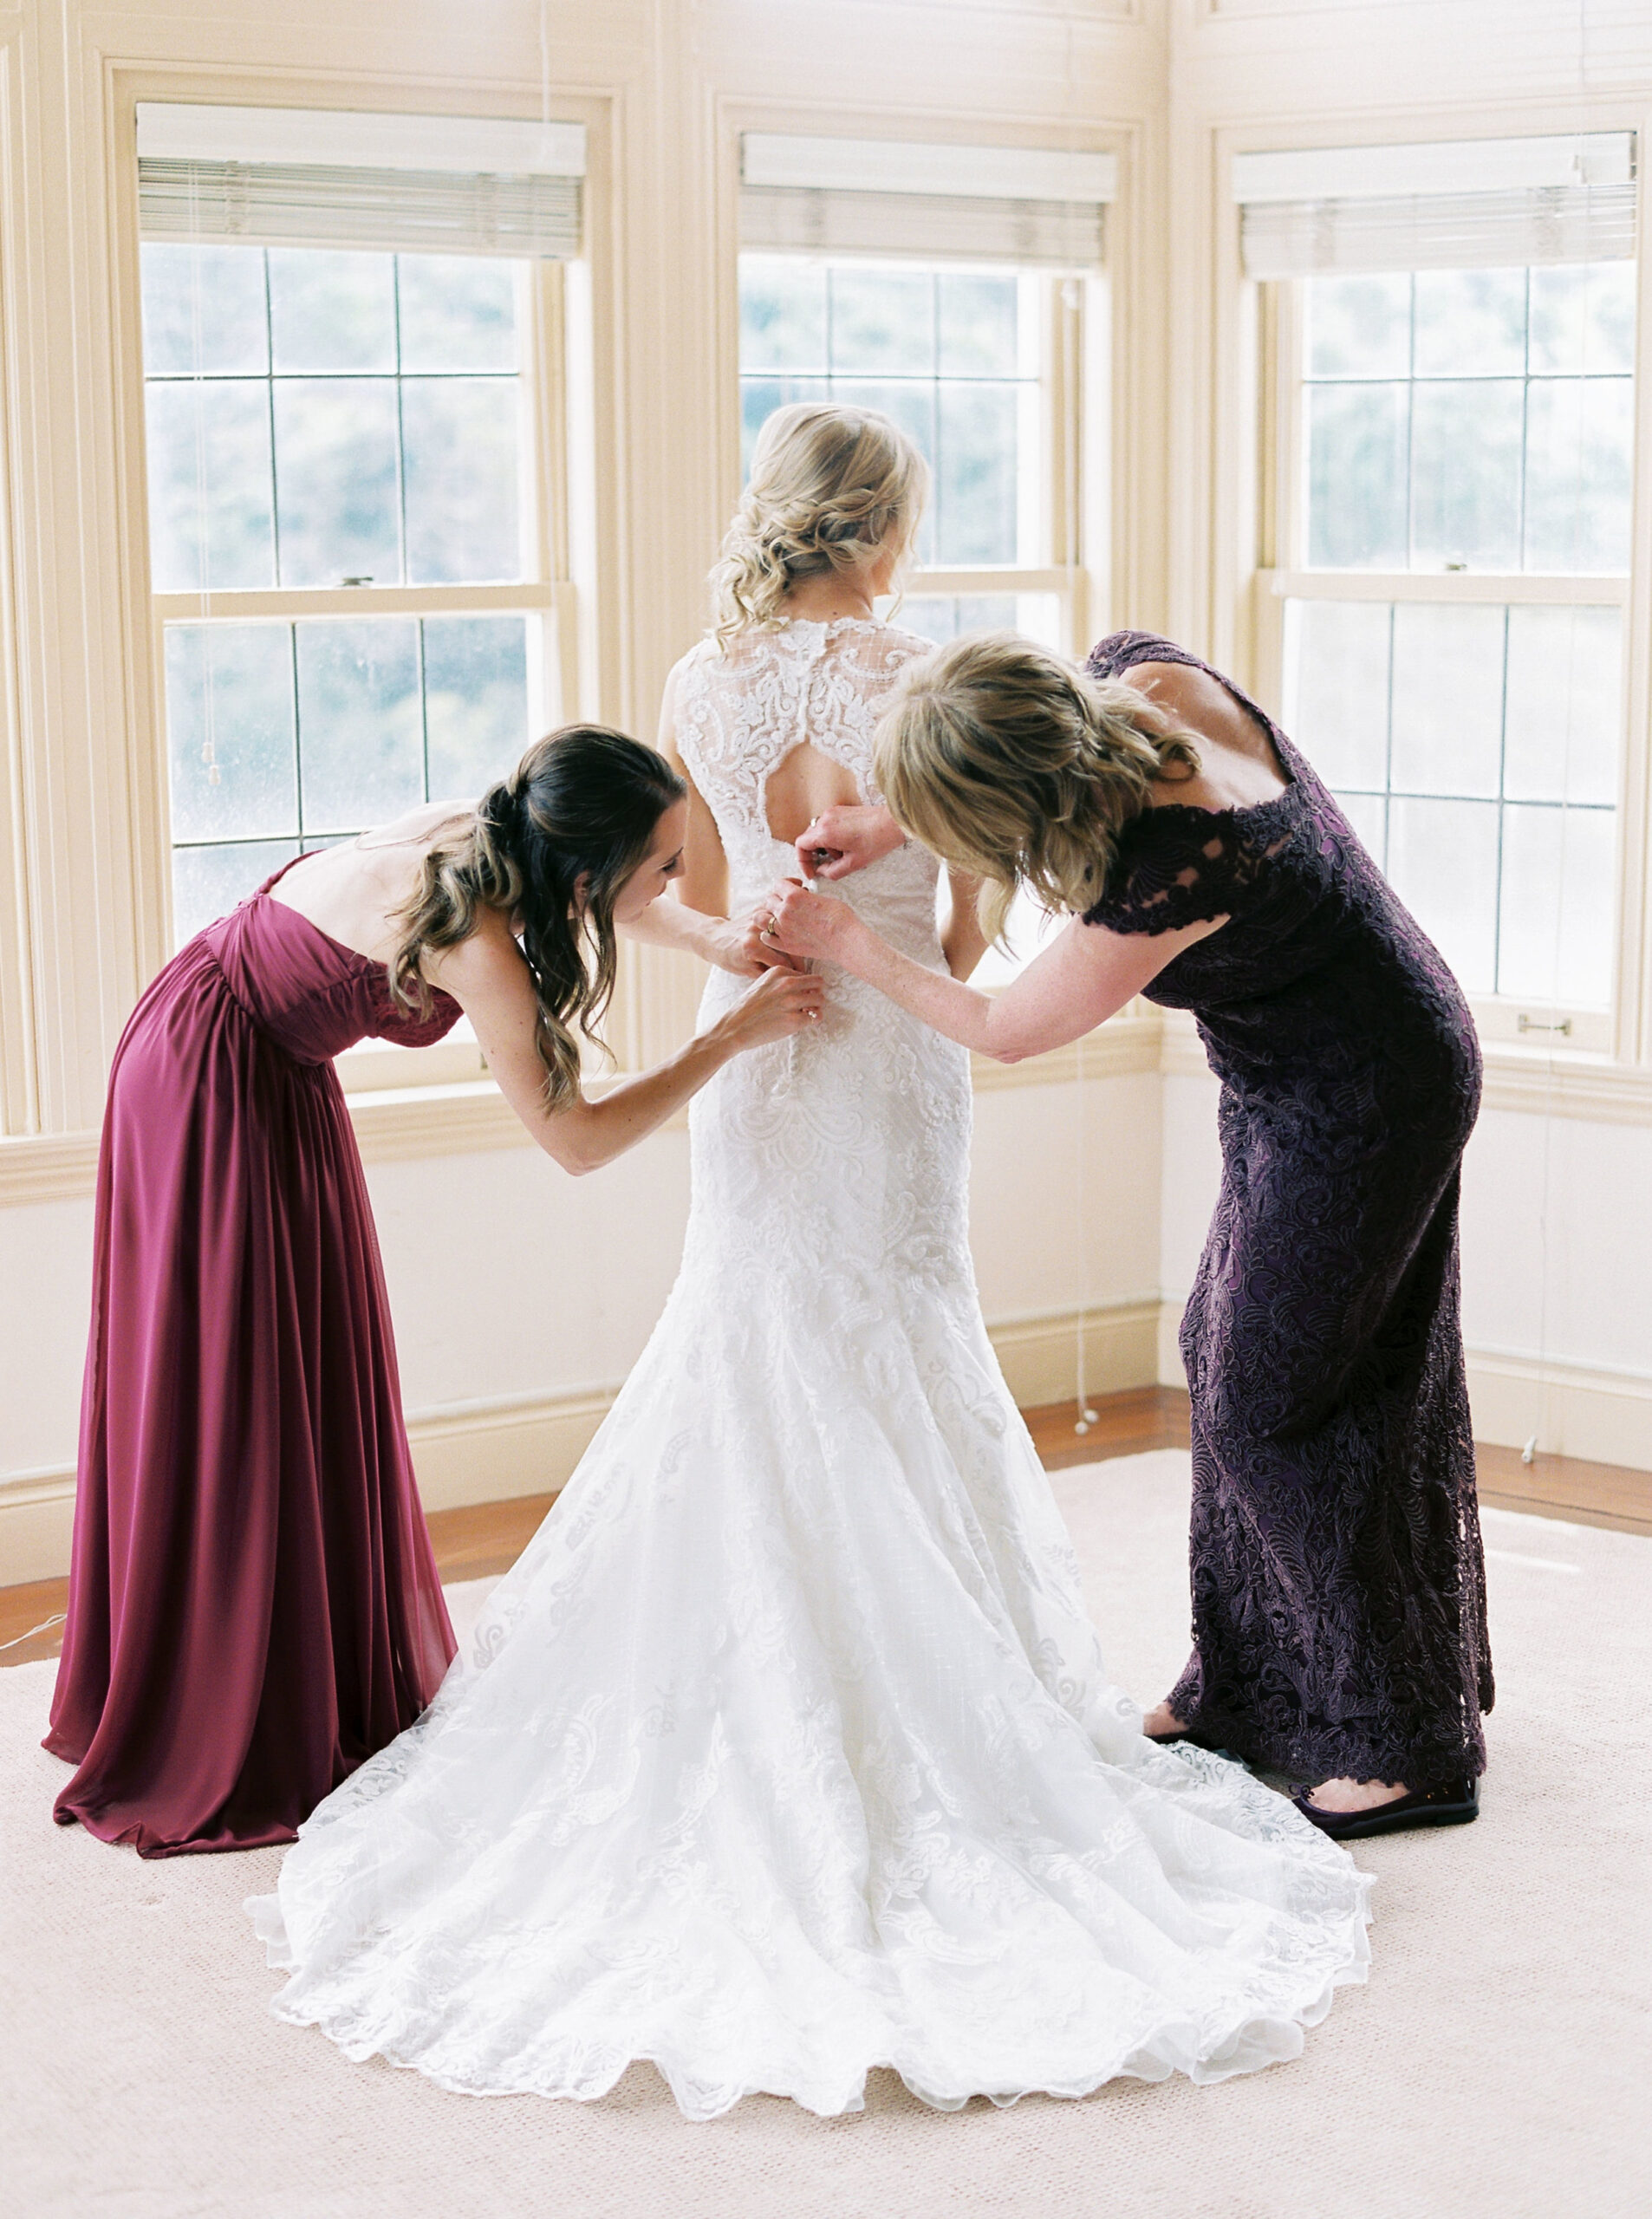 5 Tips on How to Get The Best "Getting Ready" Photos